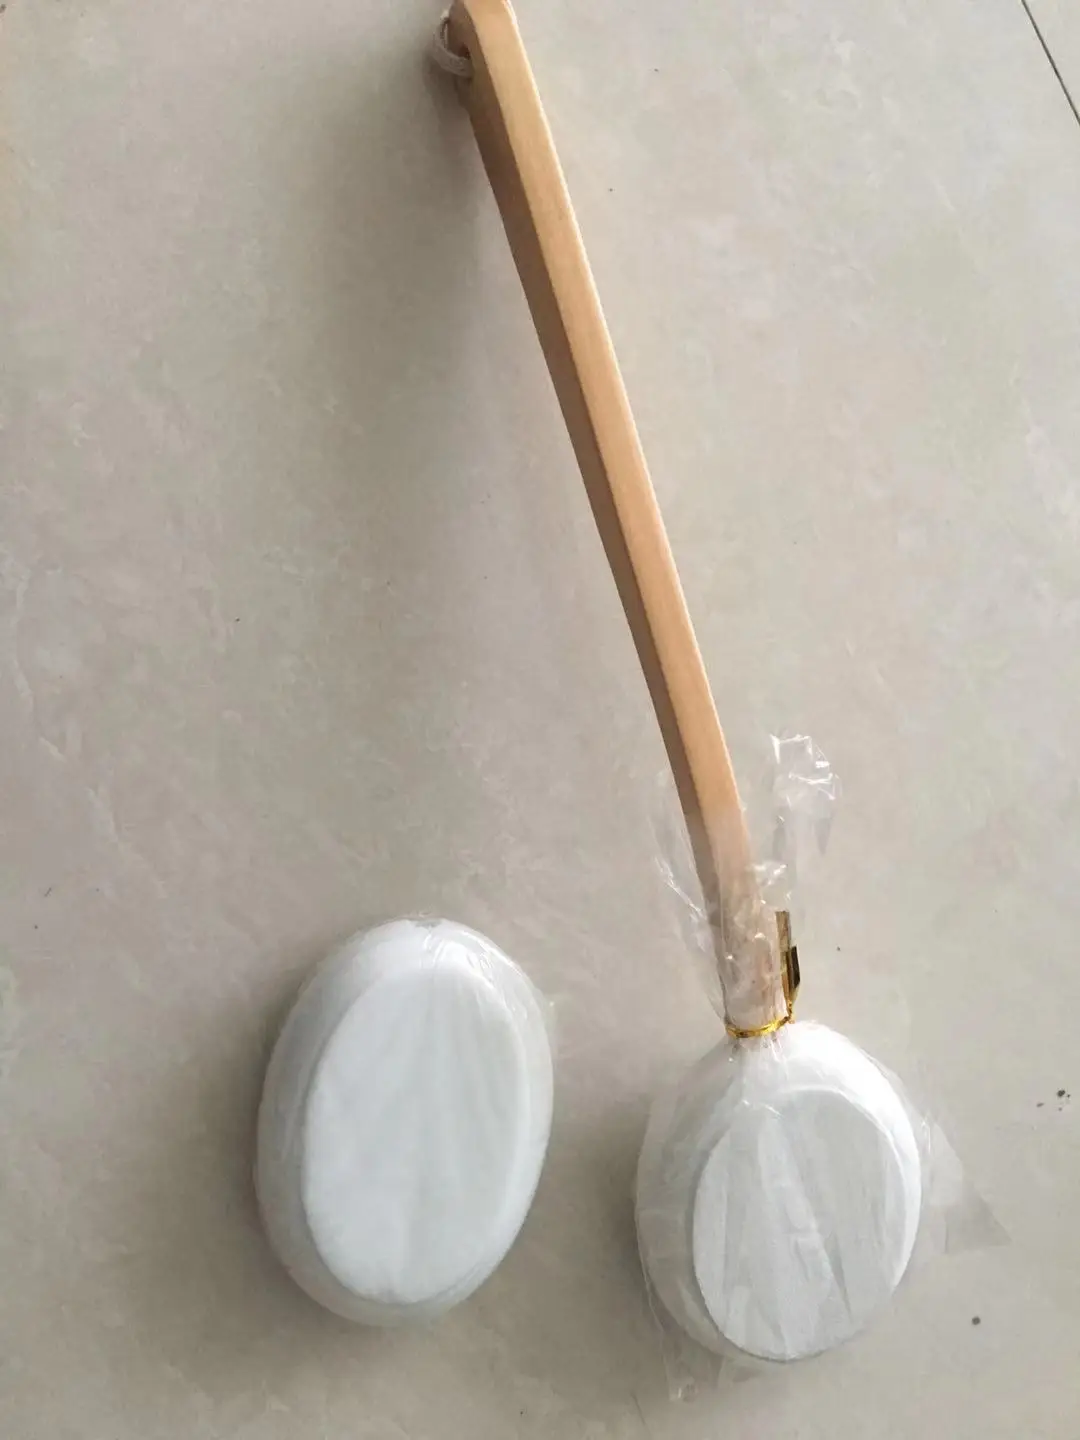 Lotion Applicator for Your Back Long Reach Handle with Pad for Easy Self Application of Shower Bath Body Wash Brush EVA Sponge